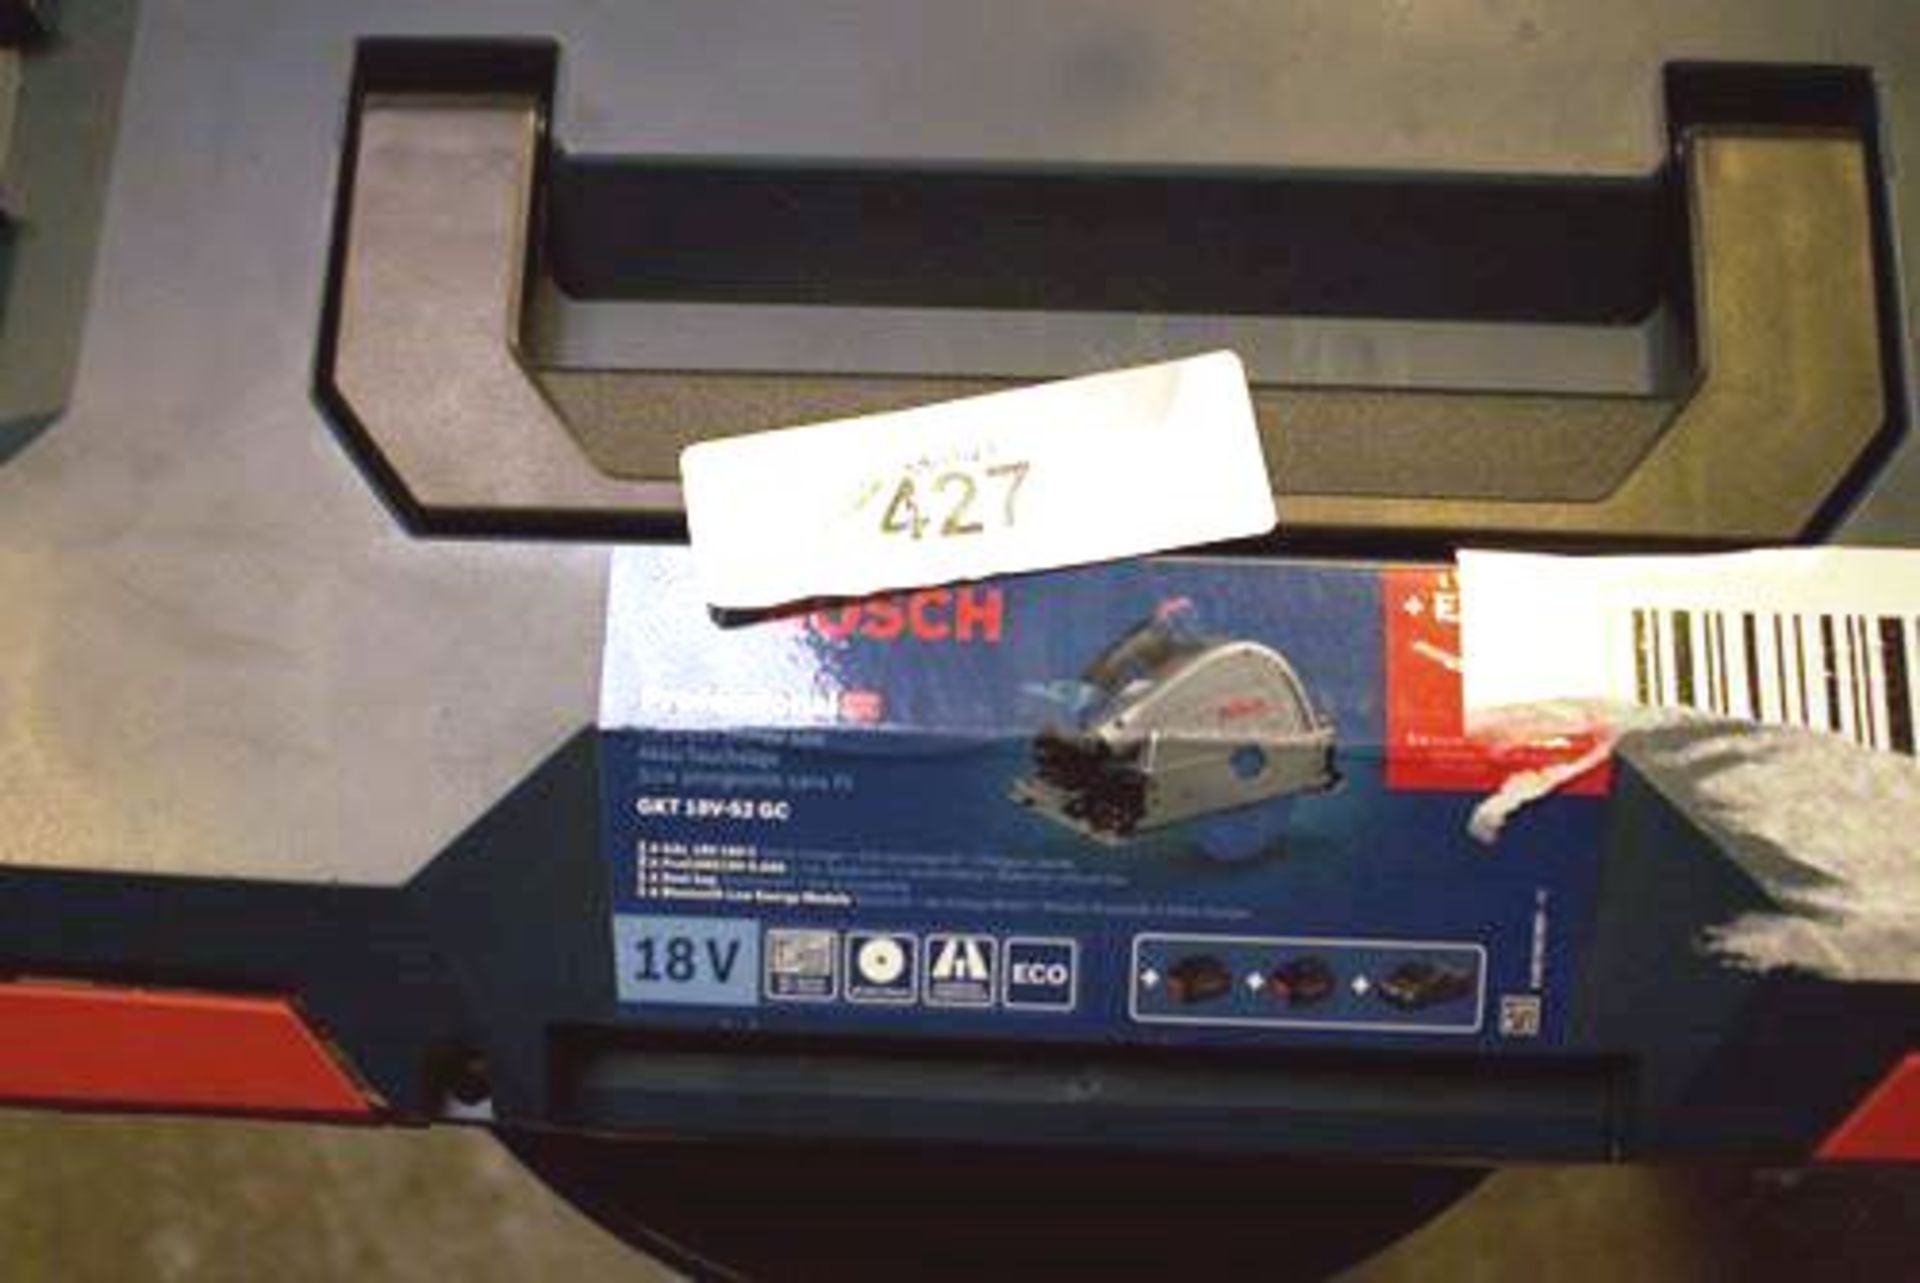 1 x Bosch Professional GKT 18V-52 GC plunge saw with plastic carry case, 2 x 18V batteries and